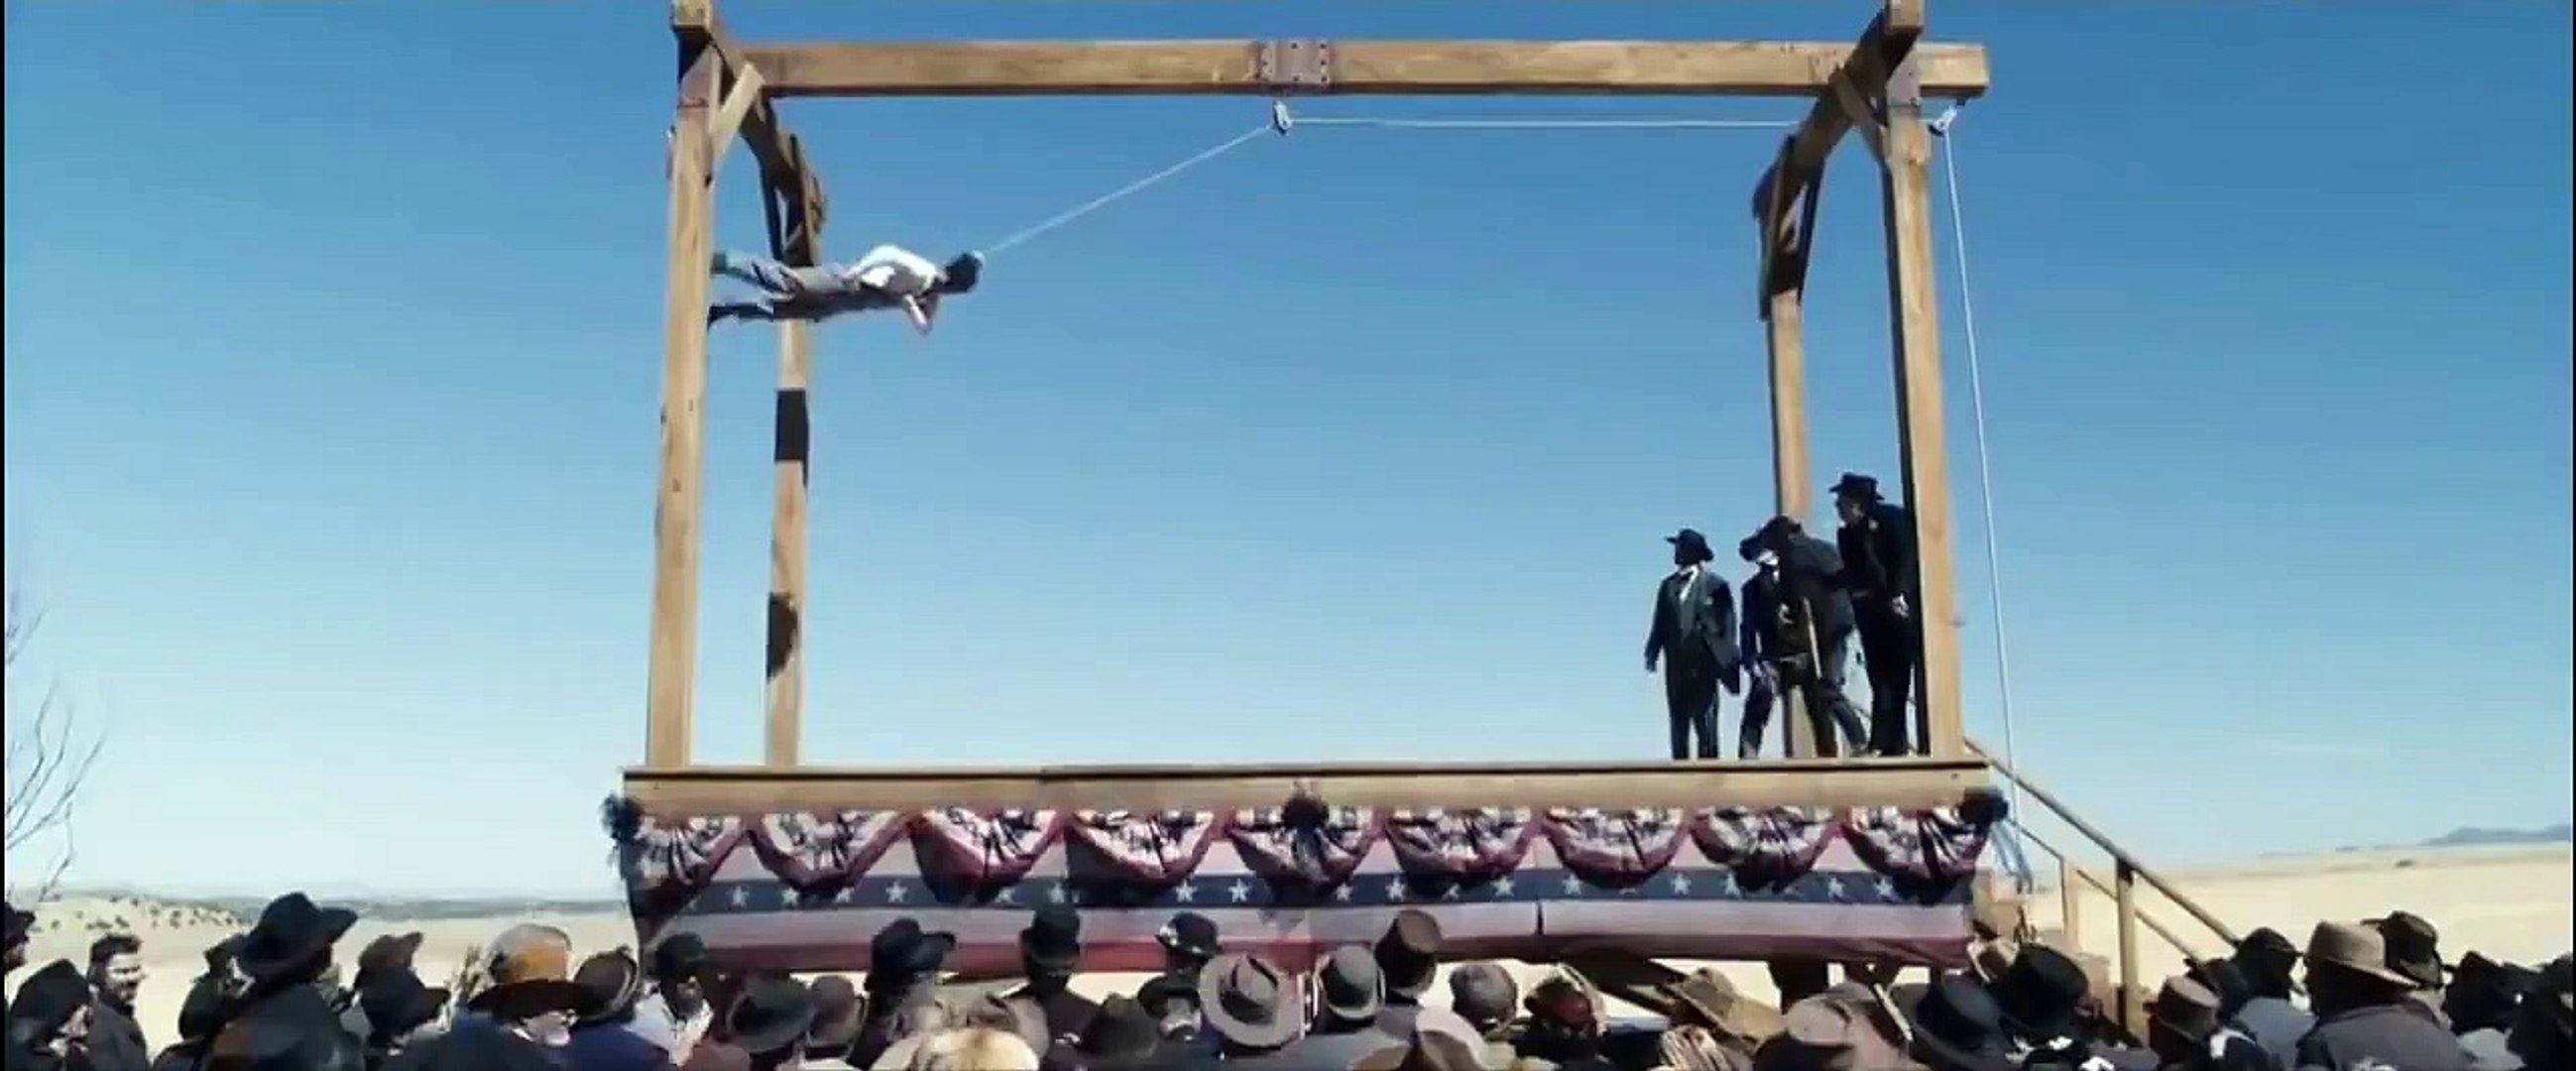 The Ridiculous 6 - Epic Hanging Scene 2015 - video dailymotion